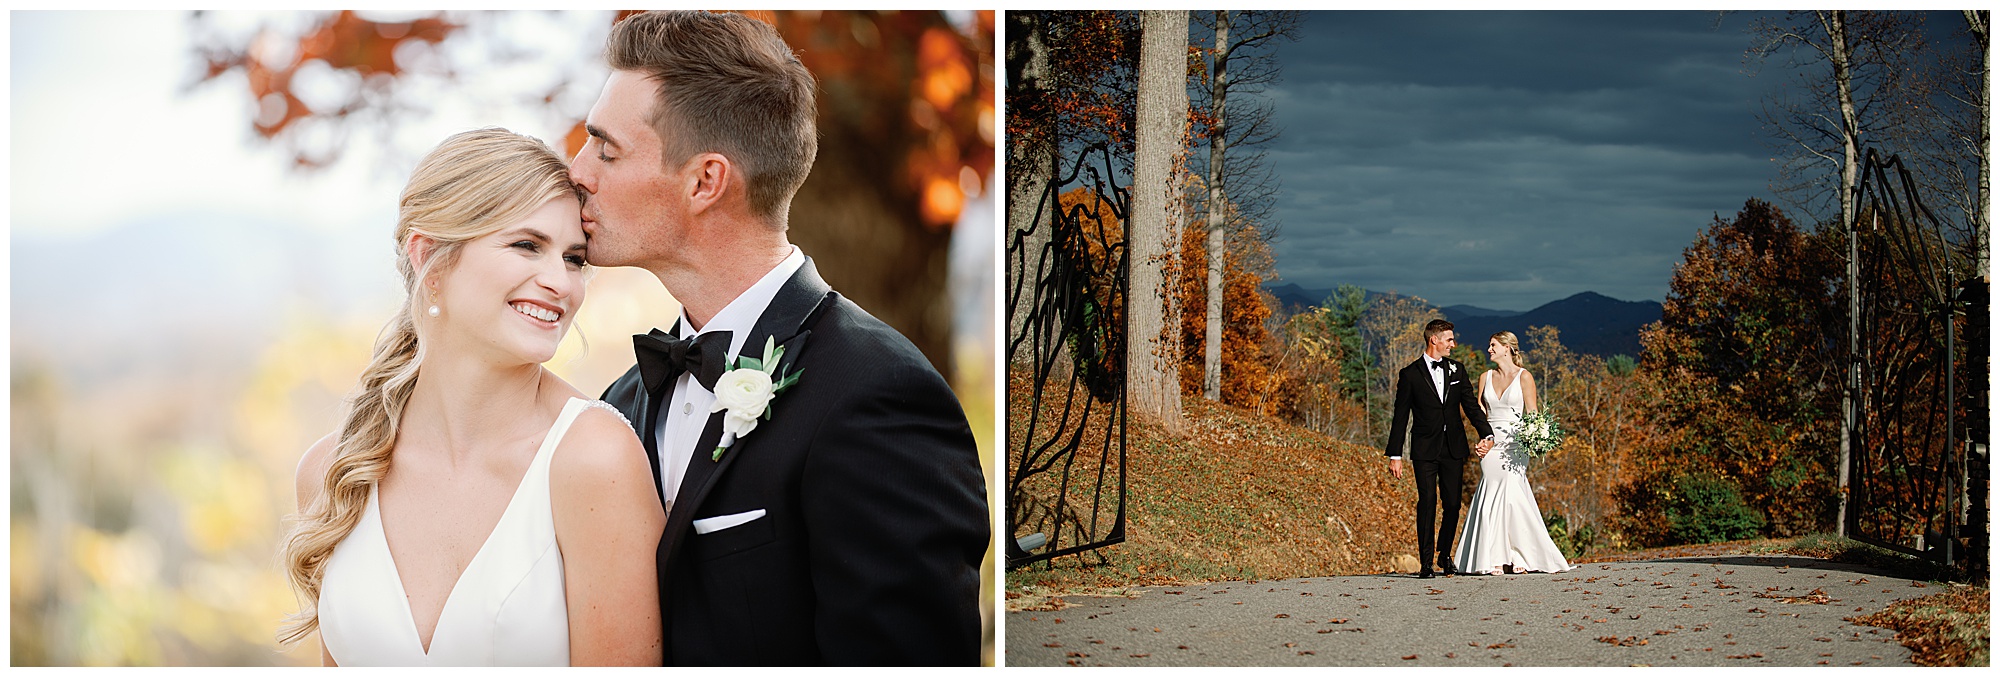 Just married at the crest center with fall colors and mountain views 